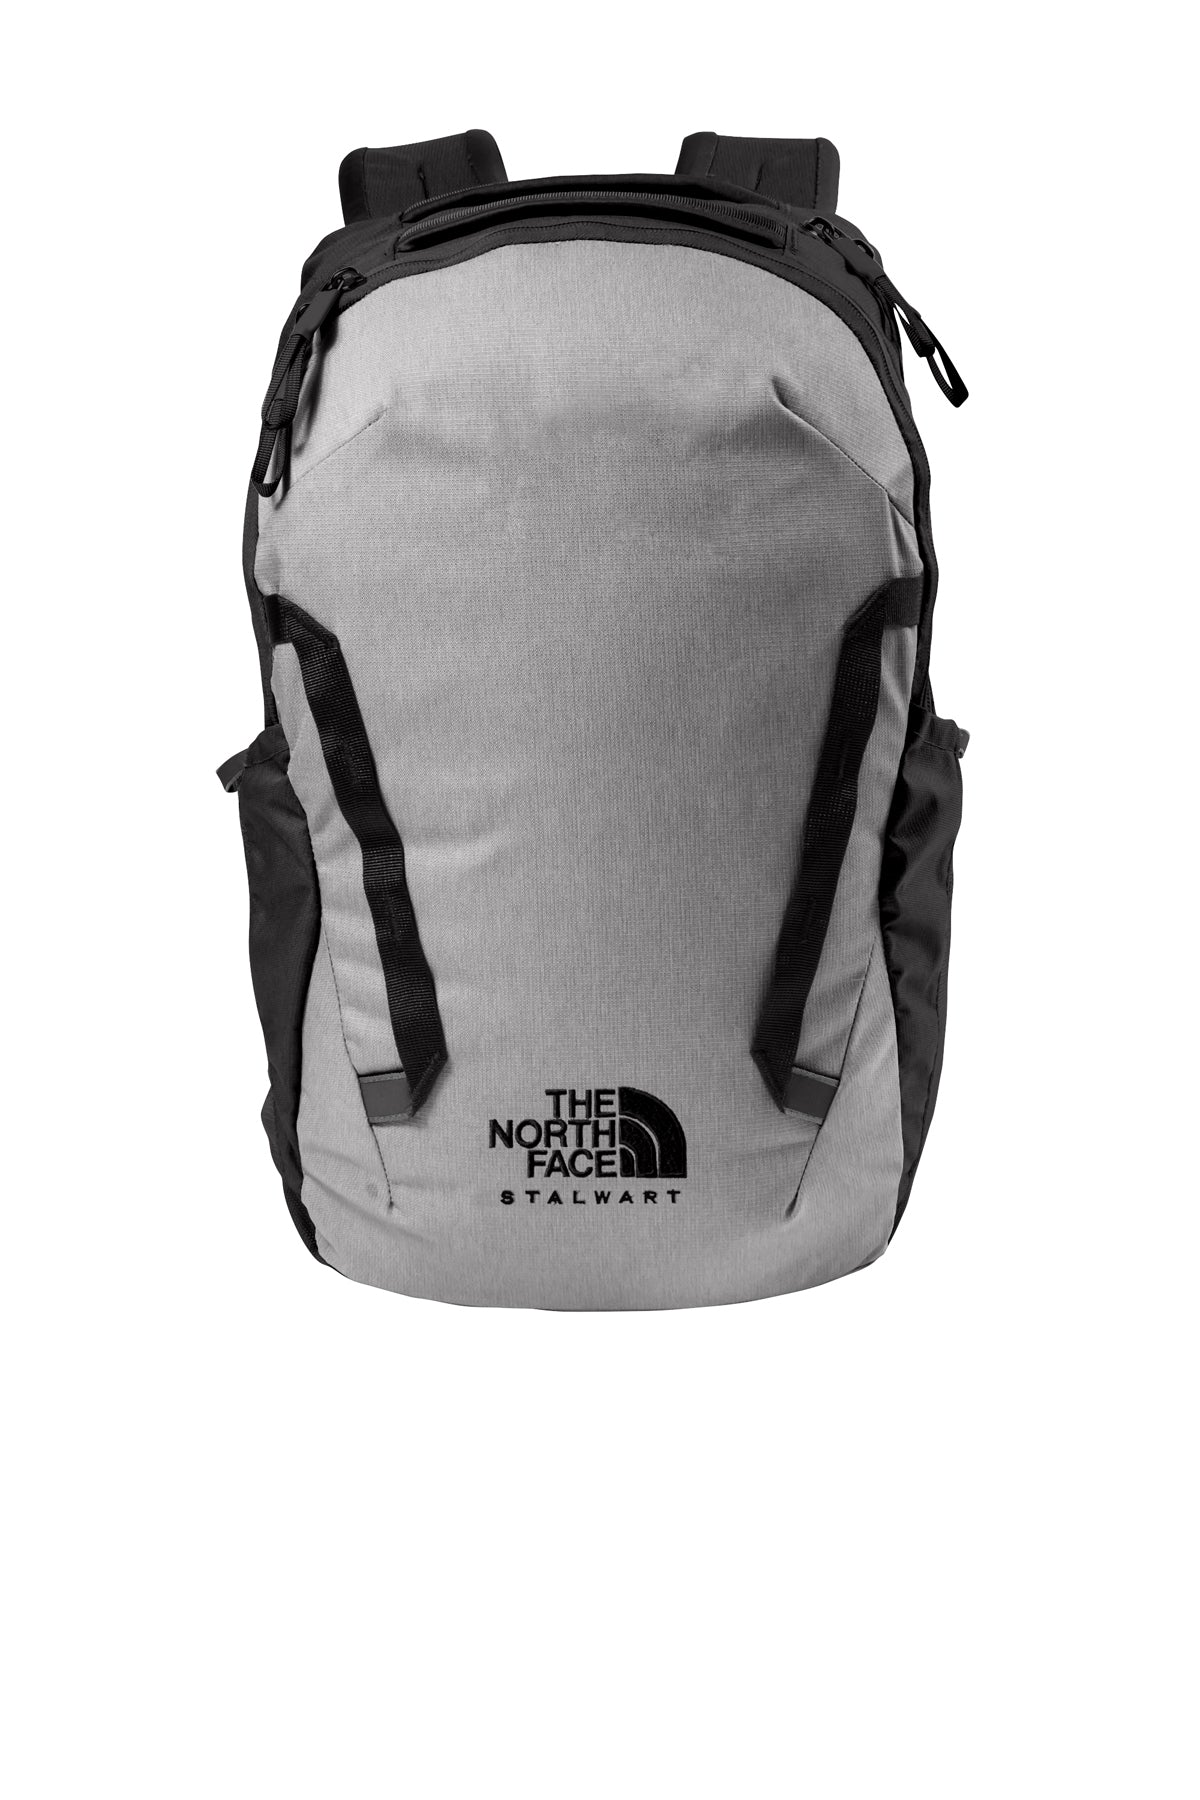 Buy mid-grey-dark-heather-tnf-black The North Face Stalwart Backpack